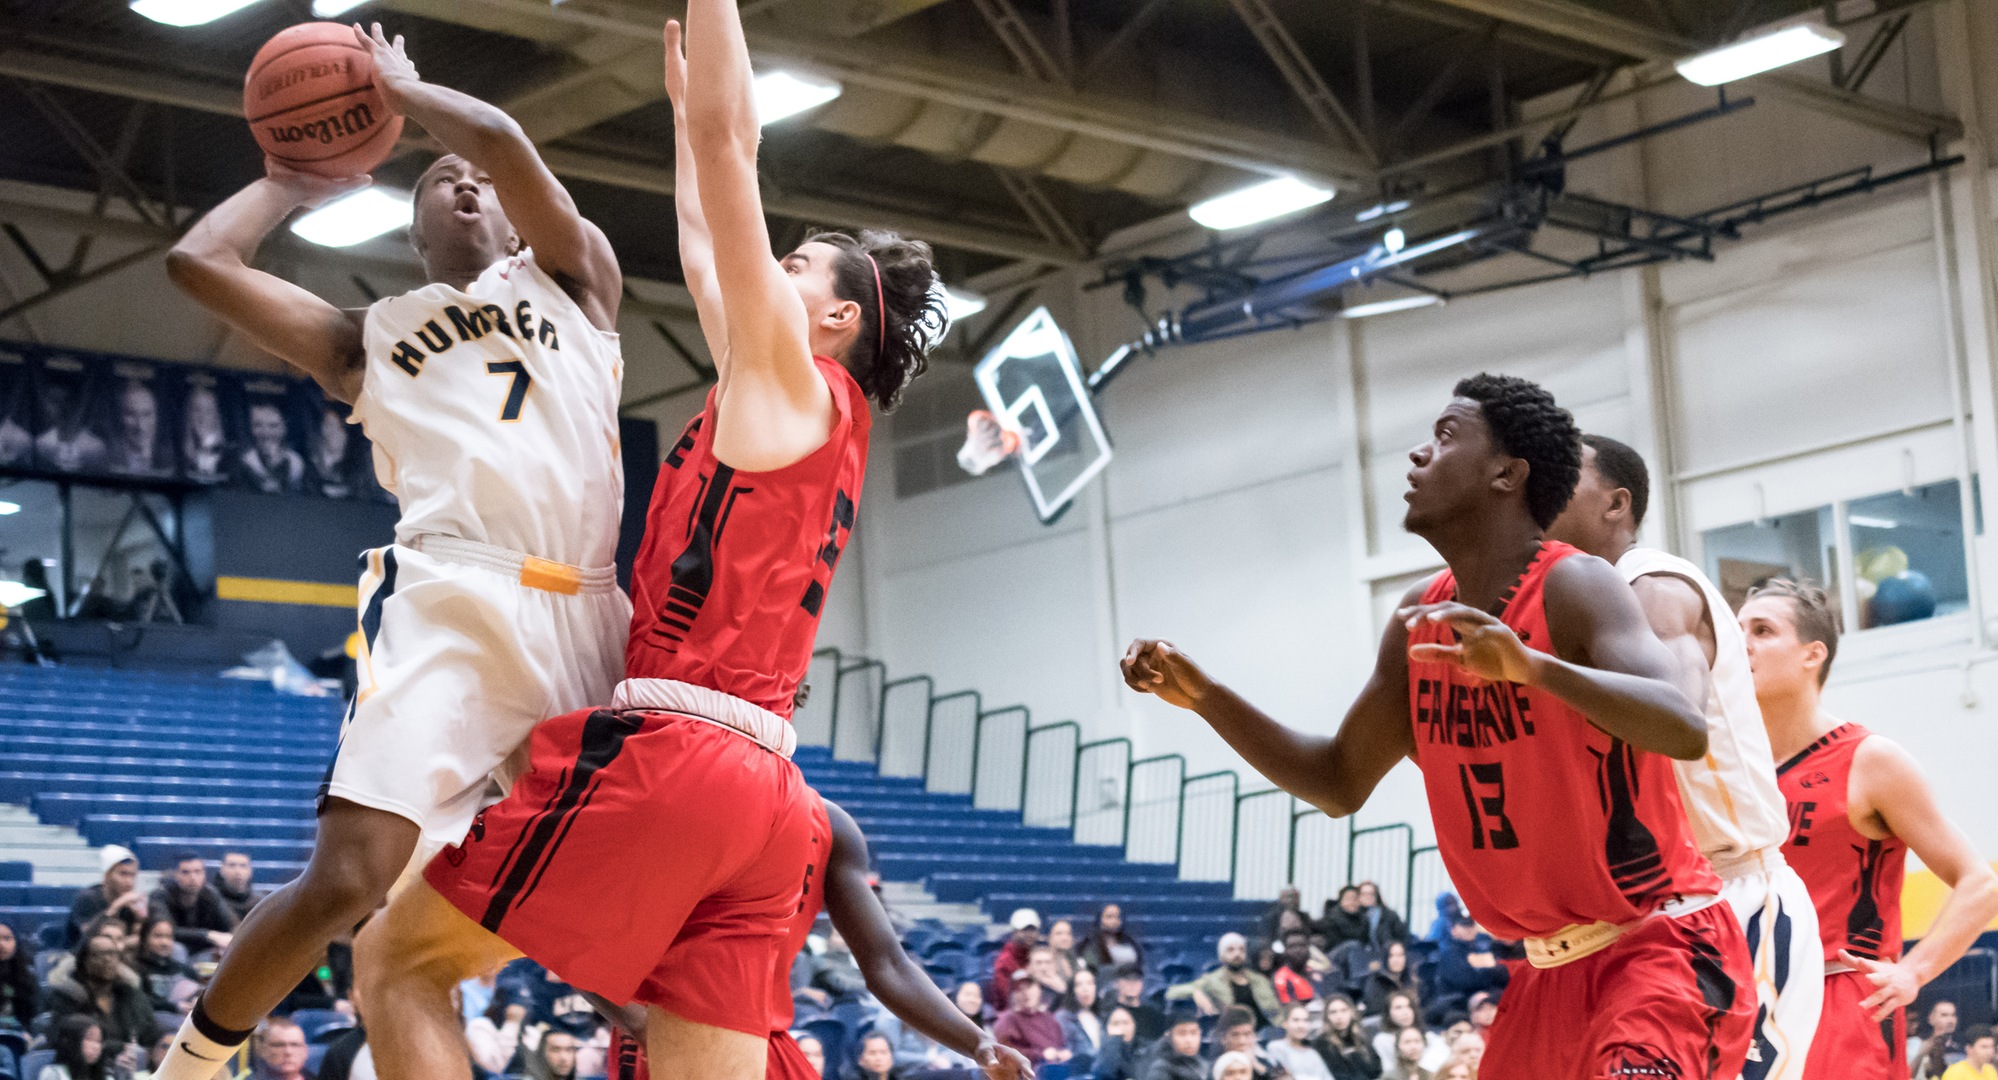 HUGE COMEBACK RESULTS IN 72-68 WIN AT HOME OVER FANSHAWE